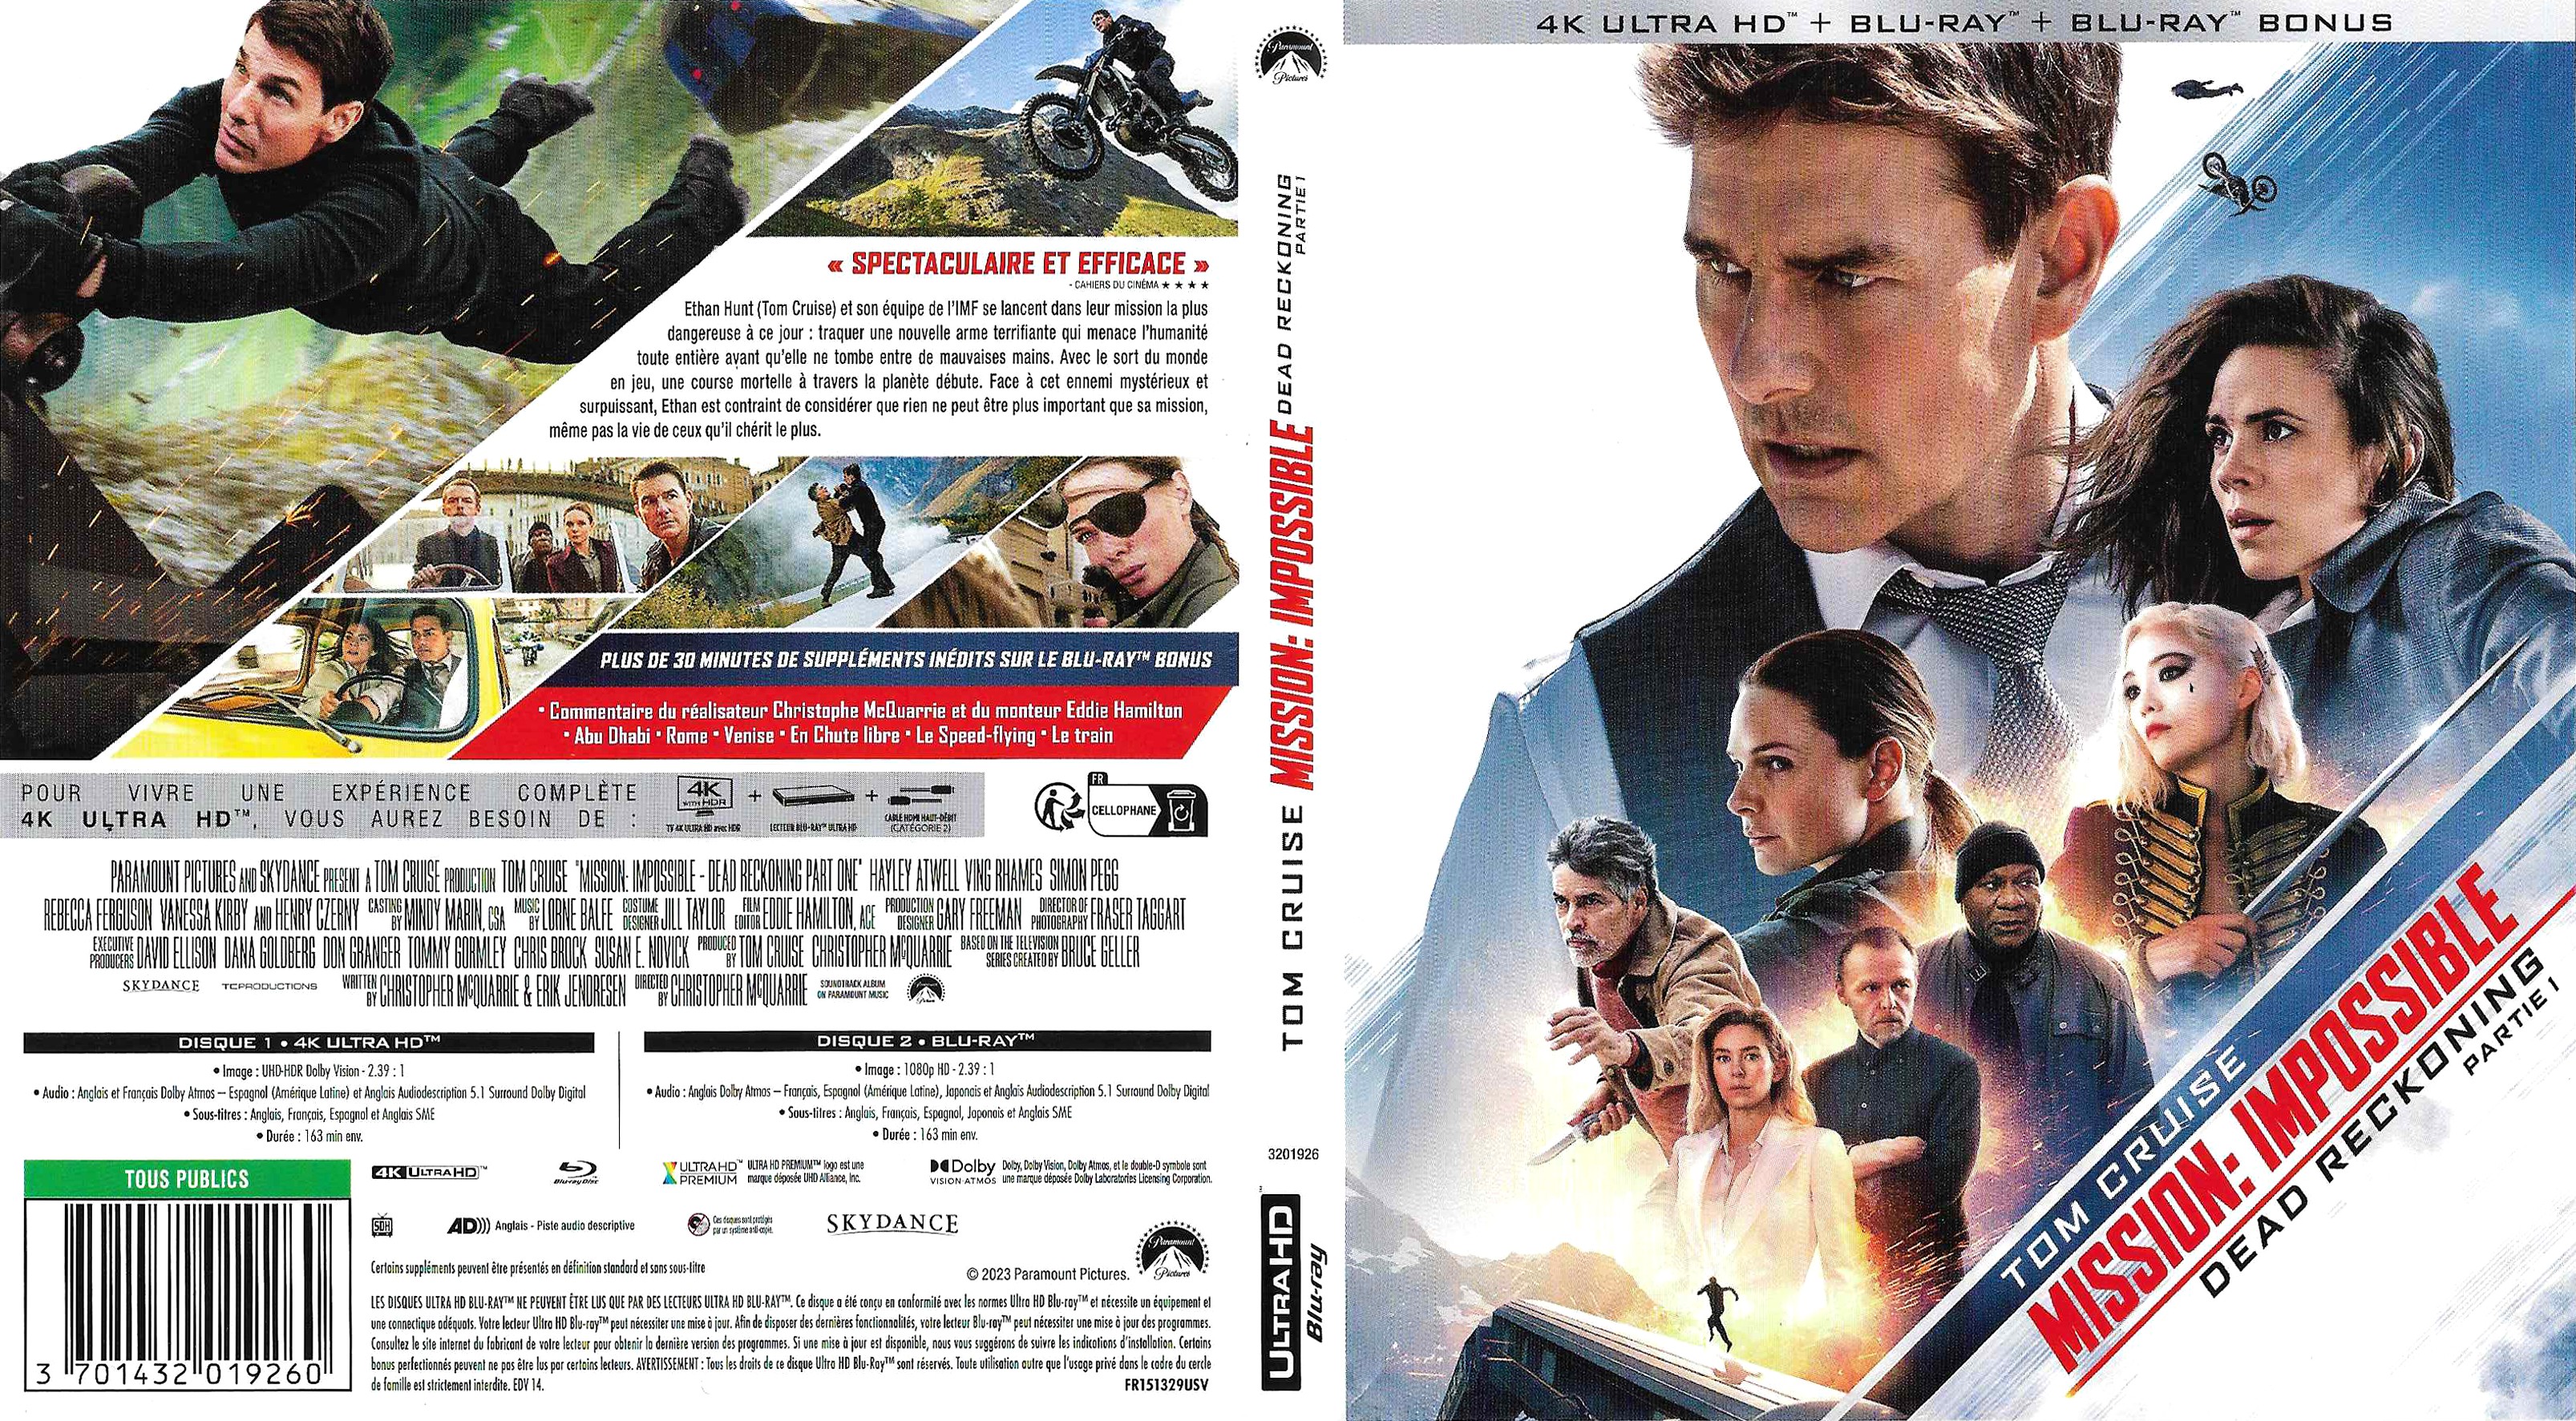 Jaquette DVD Mission impossible Dead Reckoning Partie 1 4K (BLU-RAY)